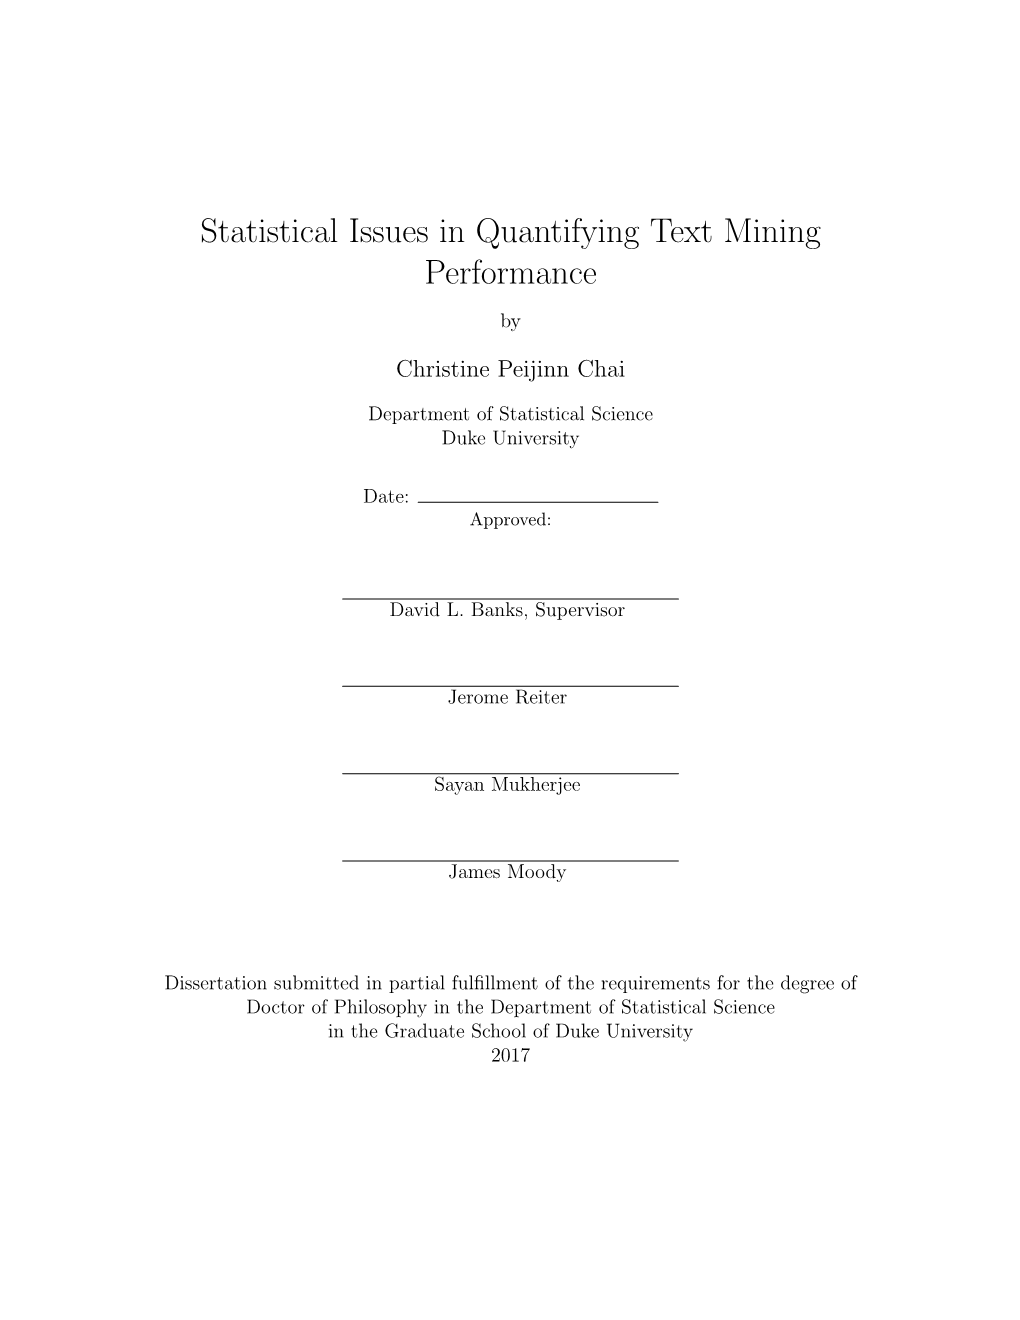 Statistical Issues in Quantifying Text Mining Performance